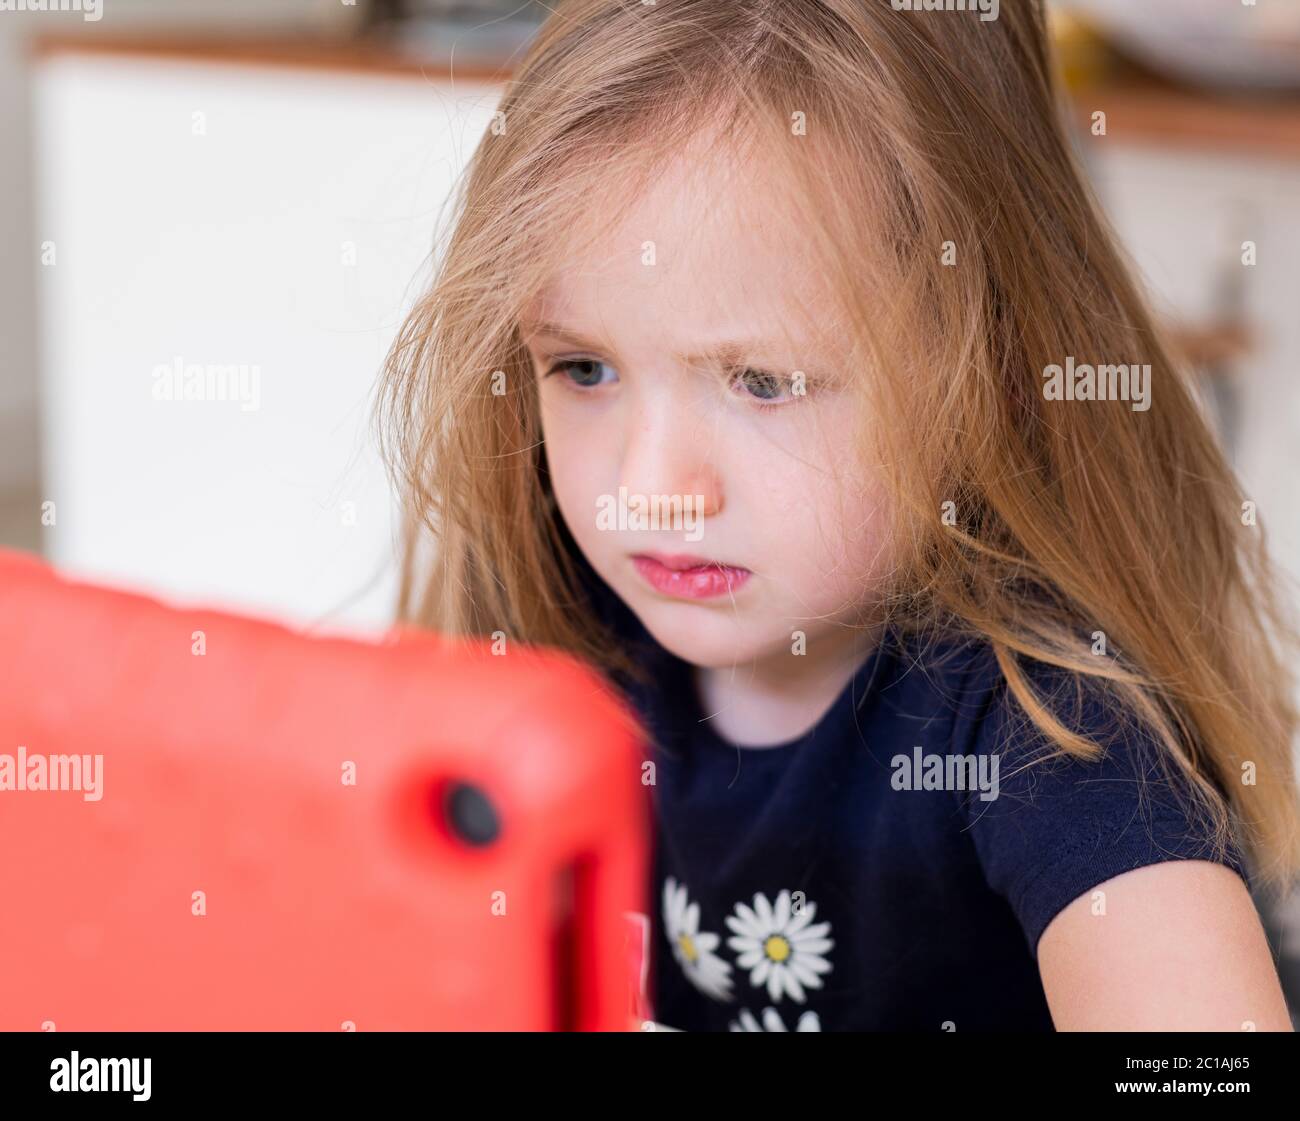 Little girl watching something on a tablet, looking intently at the screen, long dark blonde hair, pre-school child looking at tablet Stock Photo